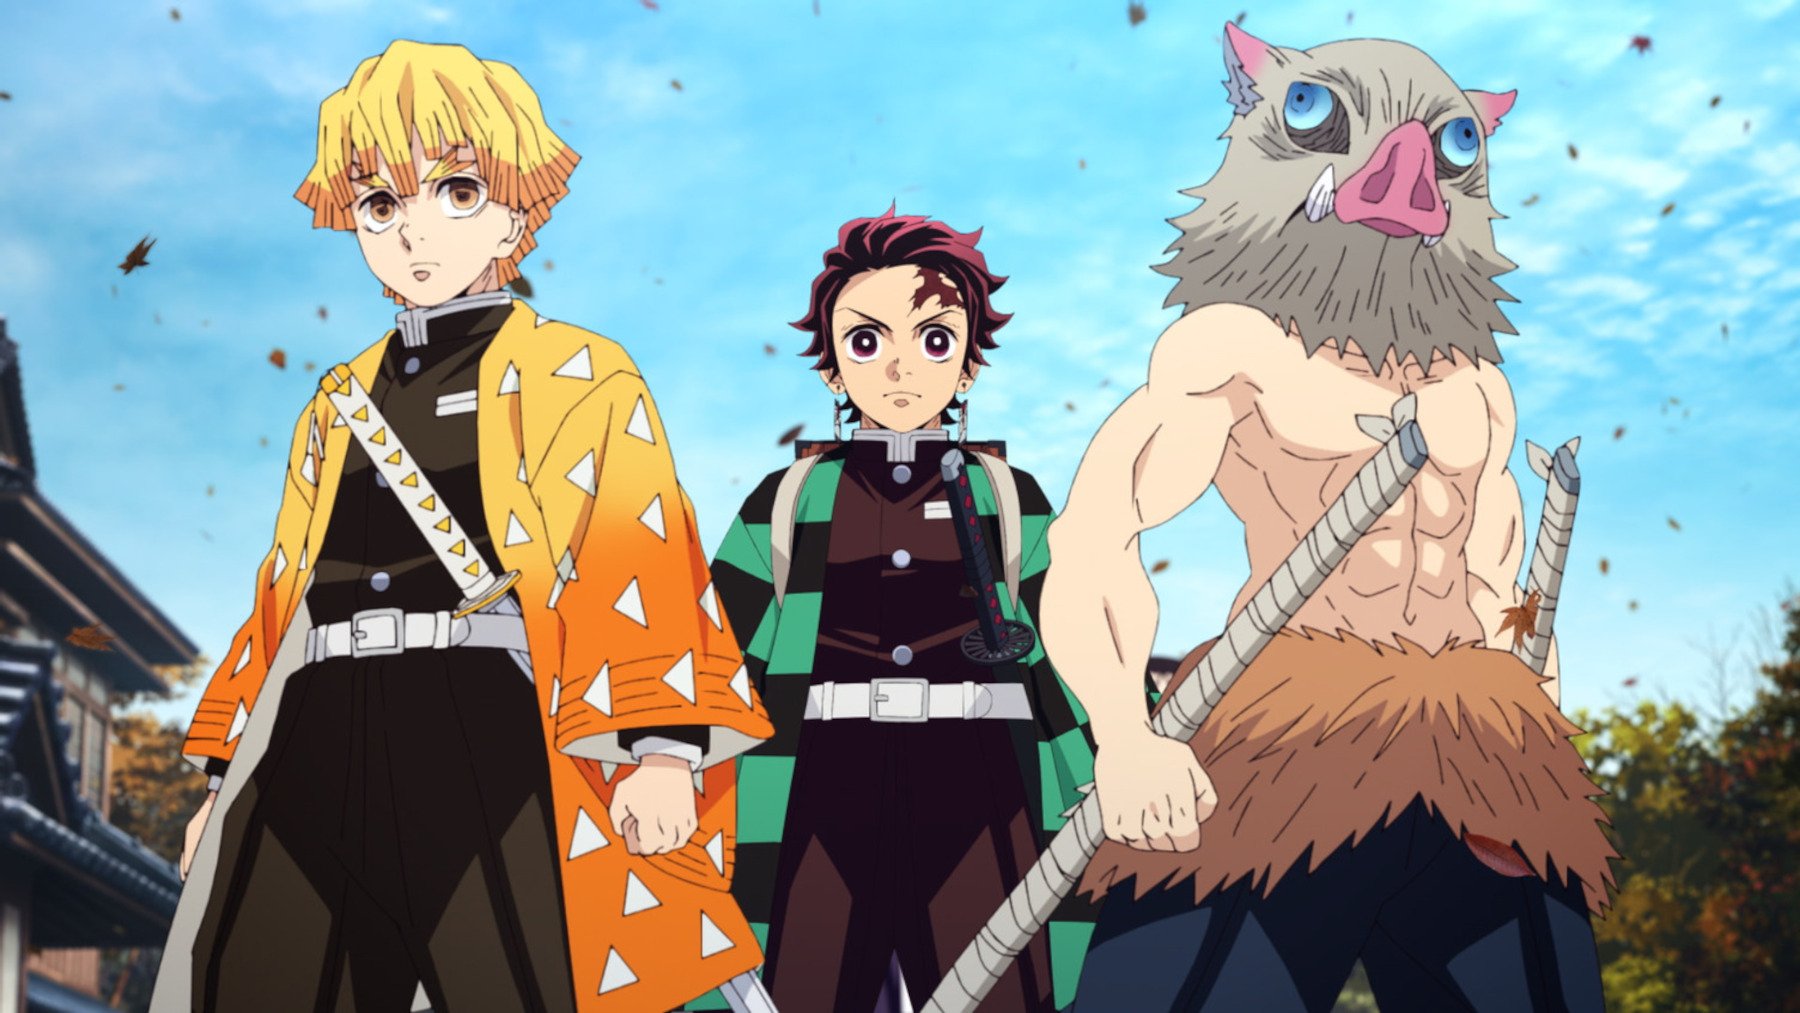 Demon Slayer' Season 2: What Is the Release Date and Time for Entertainment  District Arc Episode 2?